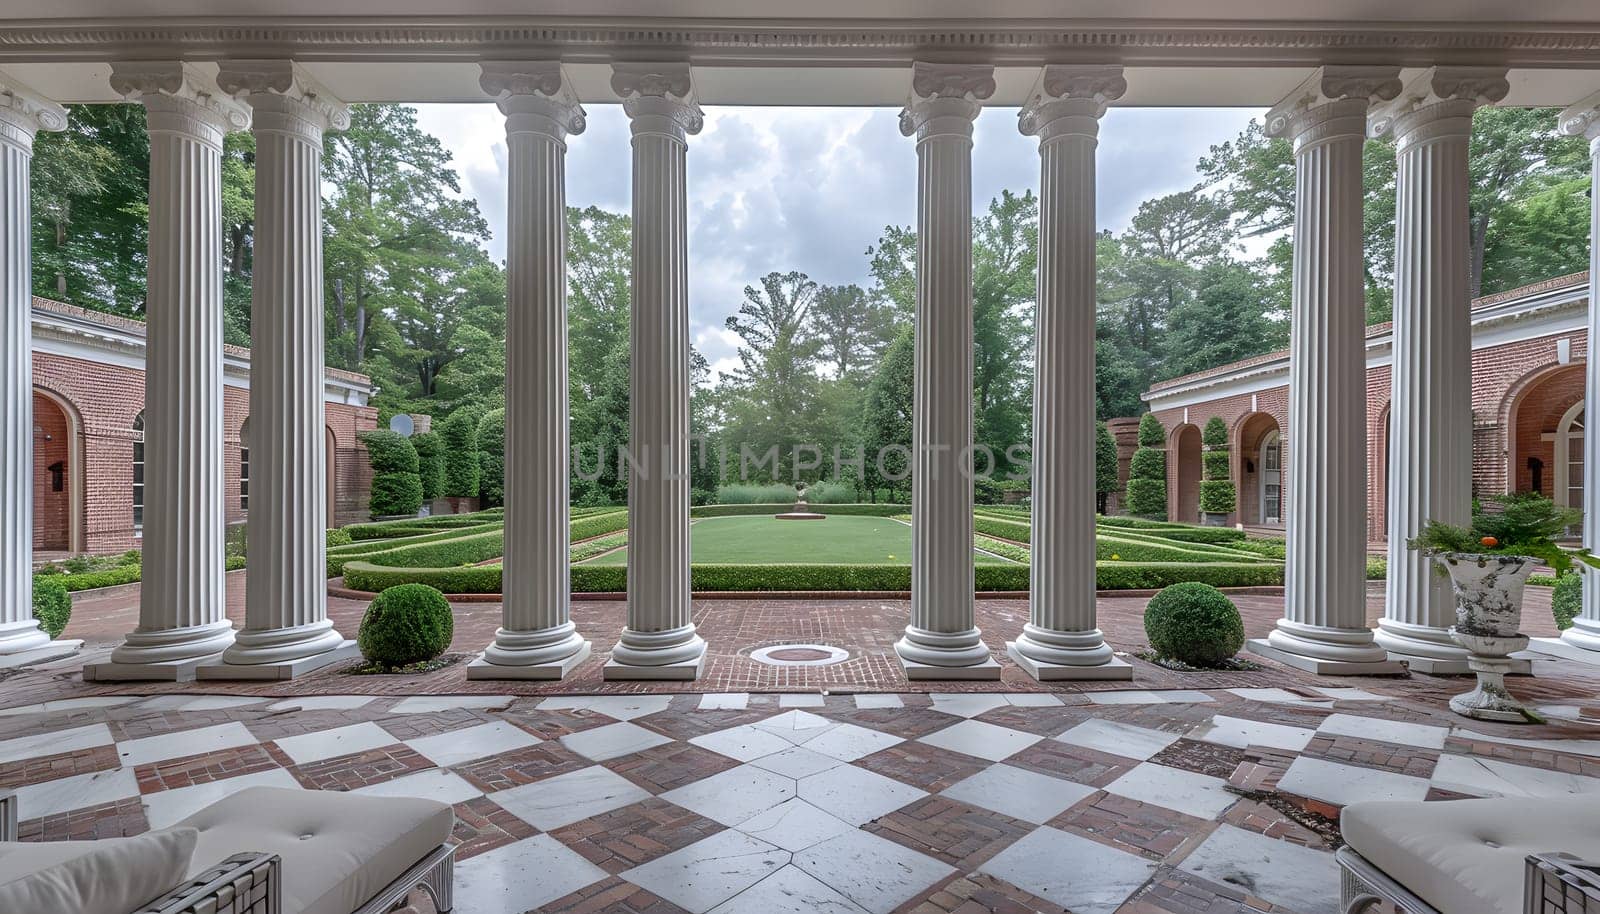 The building features a large porch with columns and a checkered composite flooring. The facade is adorned with plants and the landscape includes grass and trees